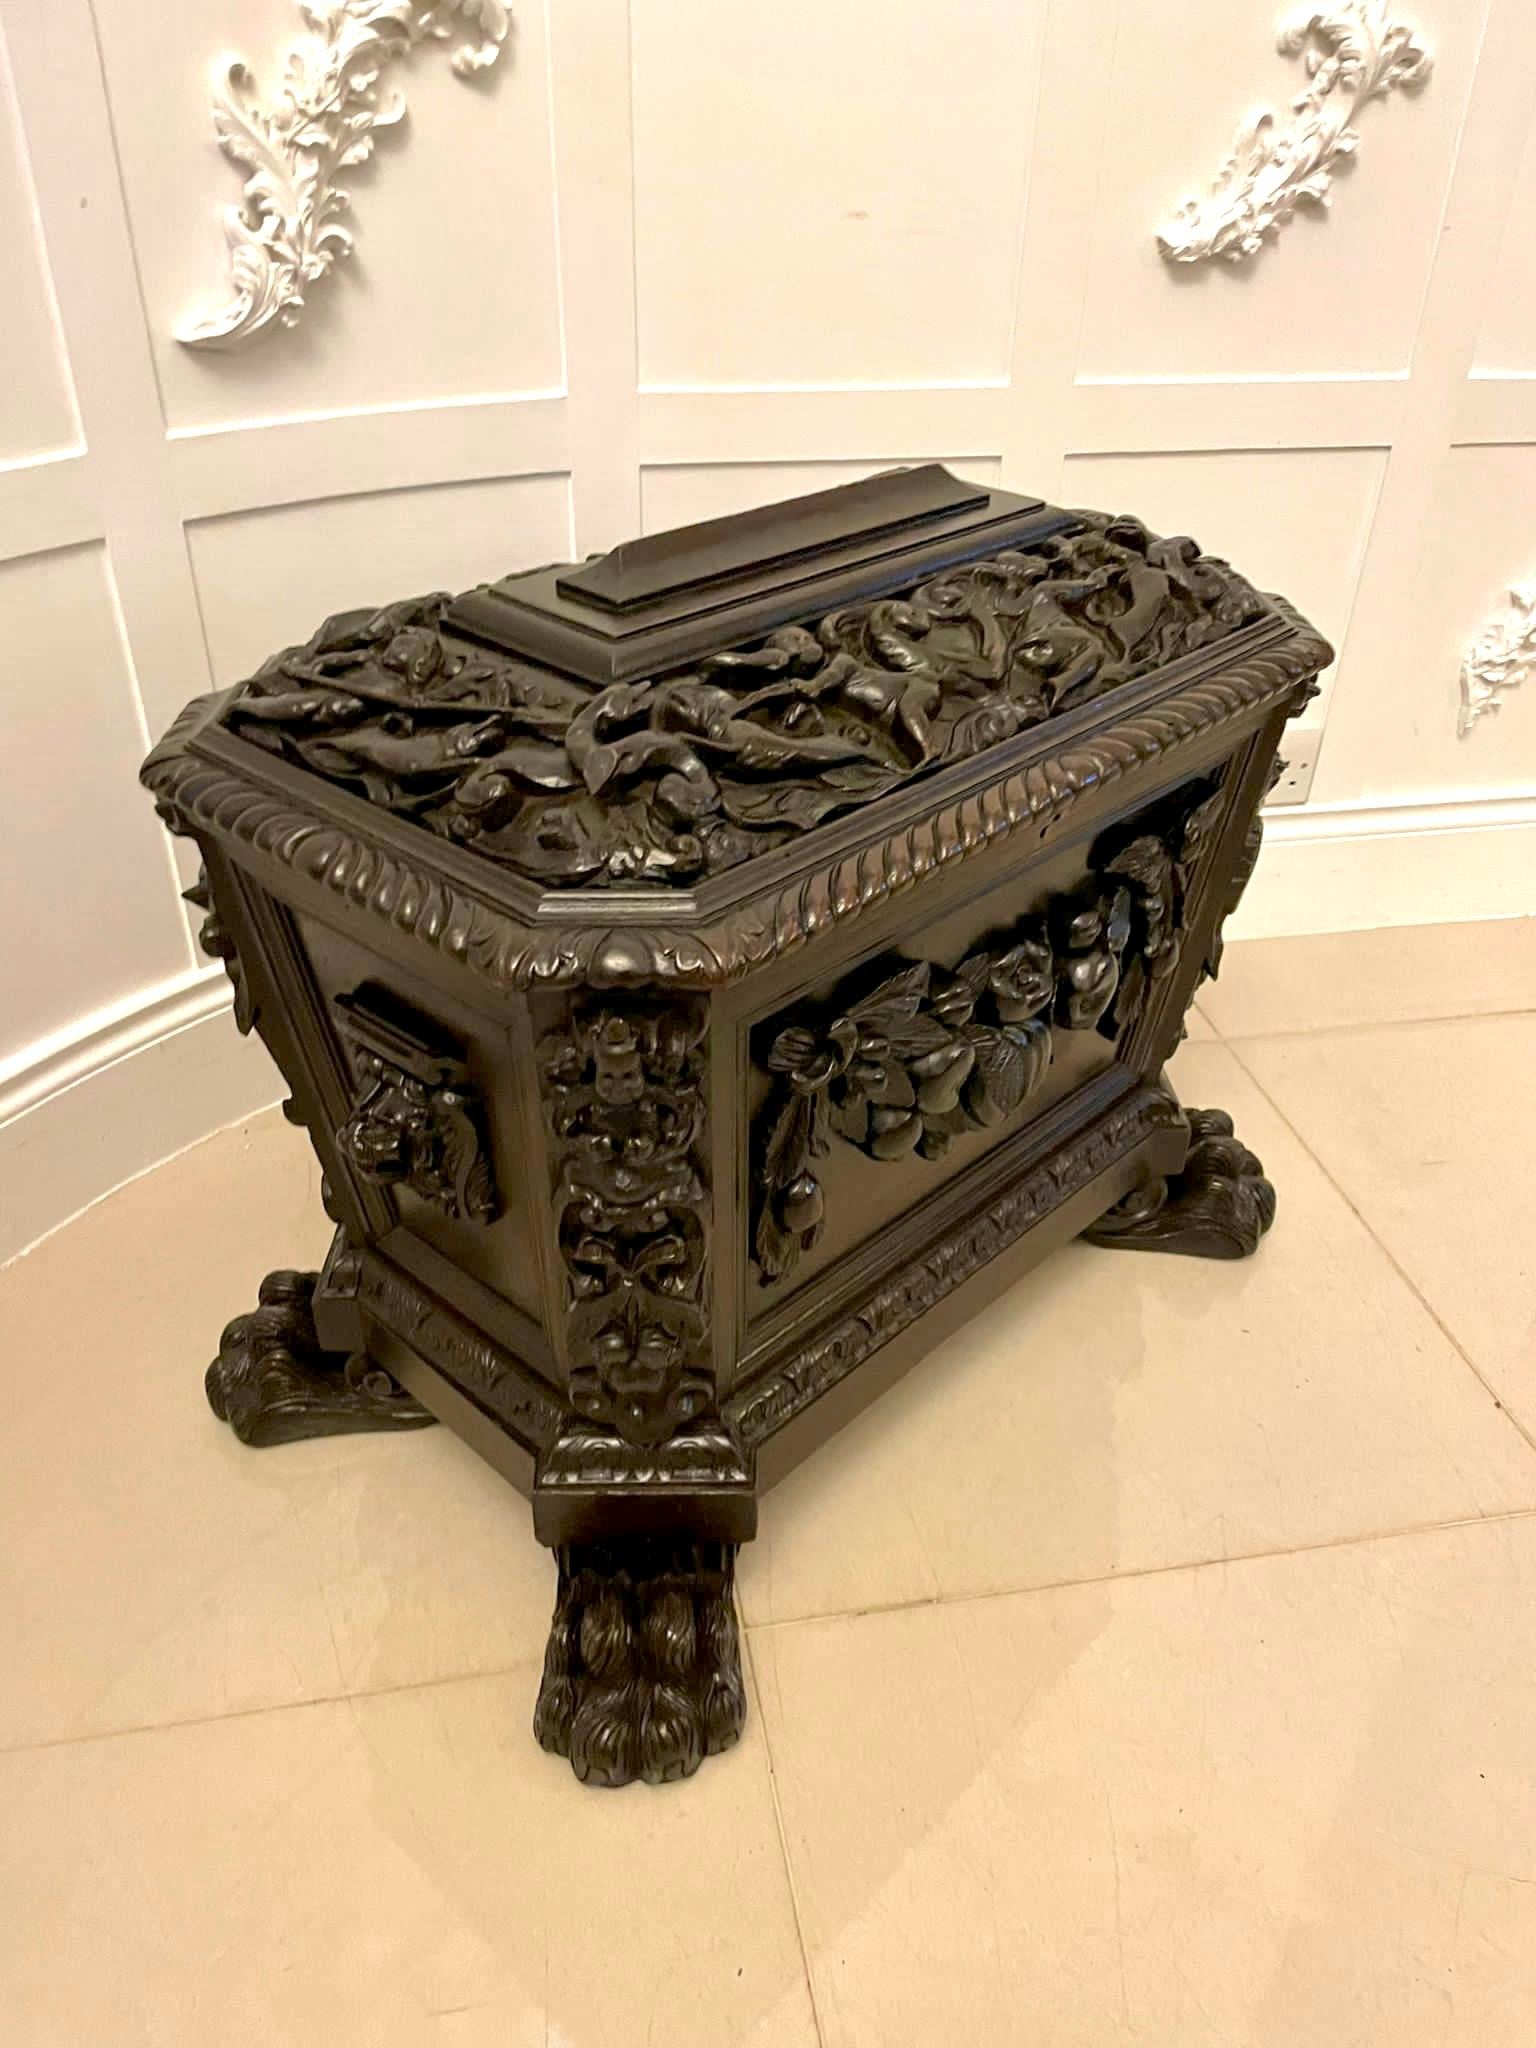 Outstanding quality antique Victorian freestanding carved oak wine cooler with outstanding quality relief carved decoration with putti and animals, reeded edge to the lift up top opening to reveal eight divisions, quality carved fruit decoration to